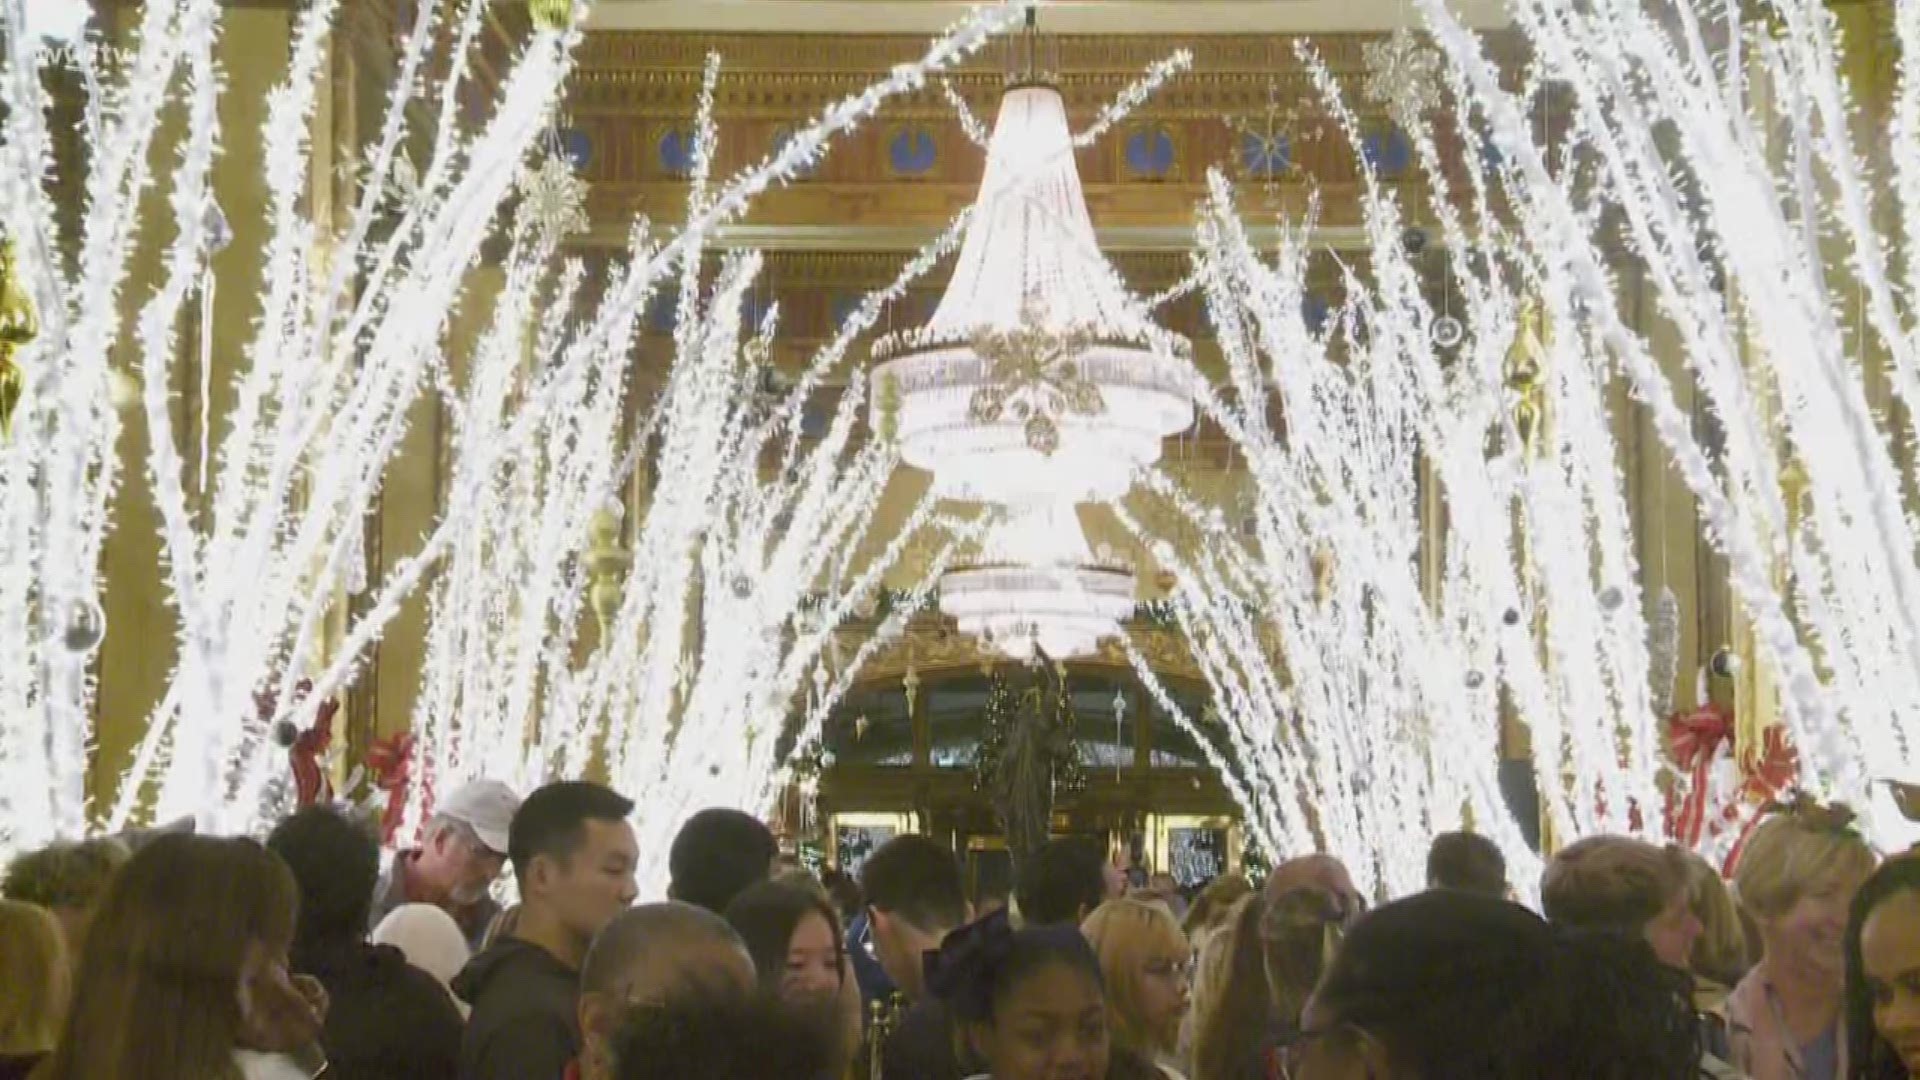 The Roosevelt hotel in New Orleans unveiled its annual holiday Winter Wonderland display Wednesday to the oohs and aahs of plenty in attendance.